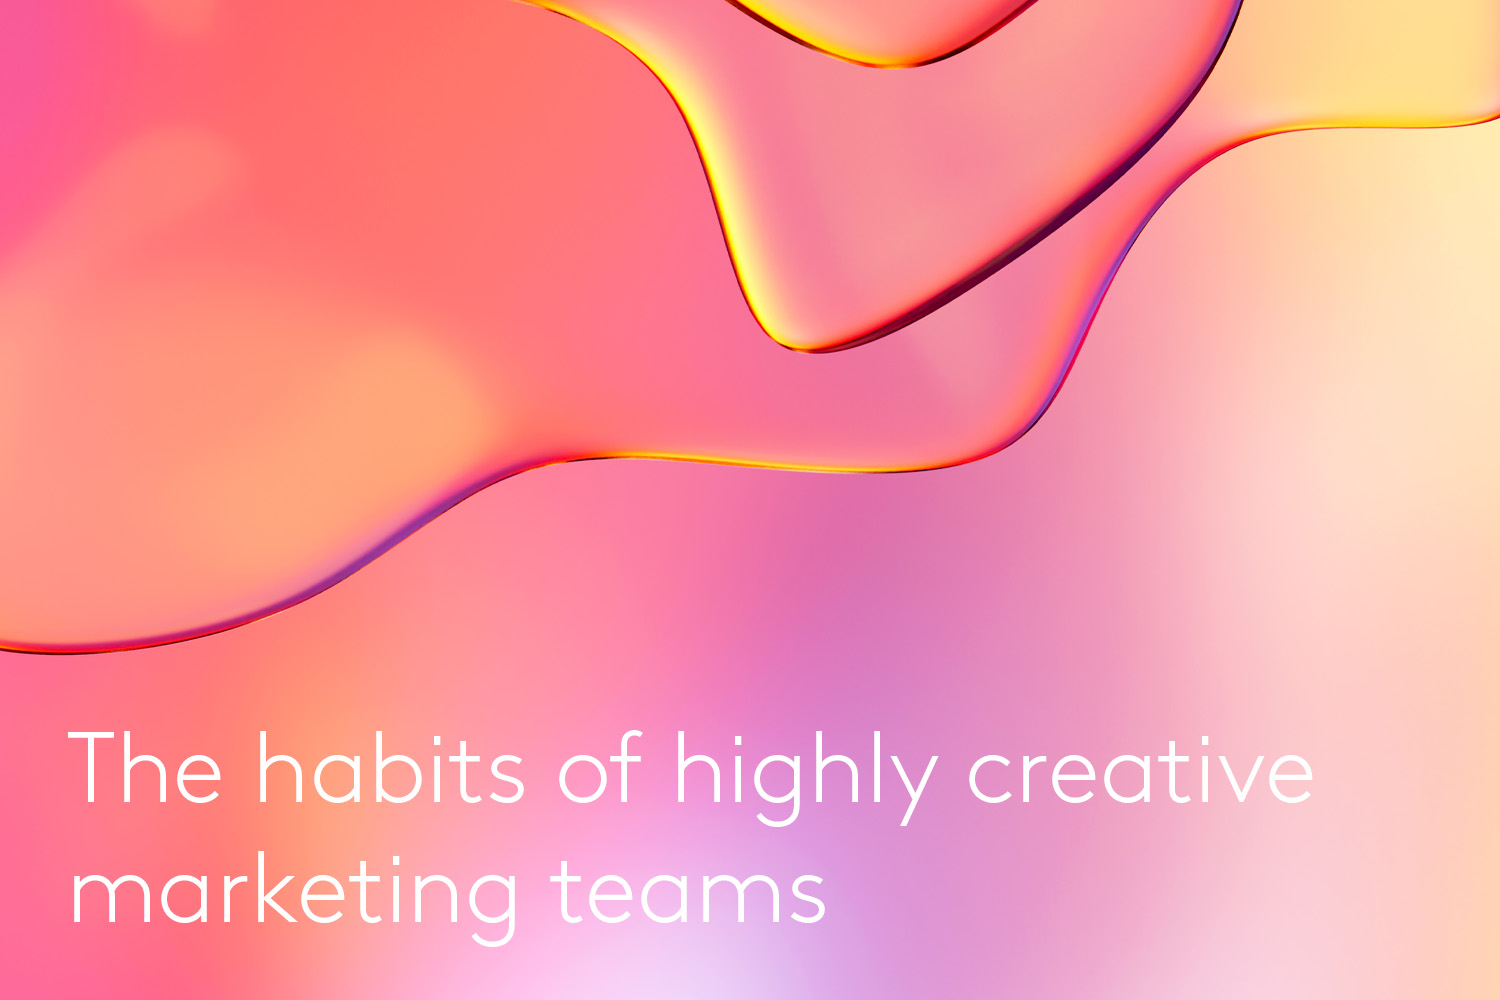 The habits of highly creative marketing teams